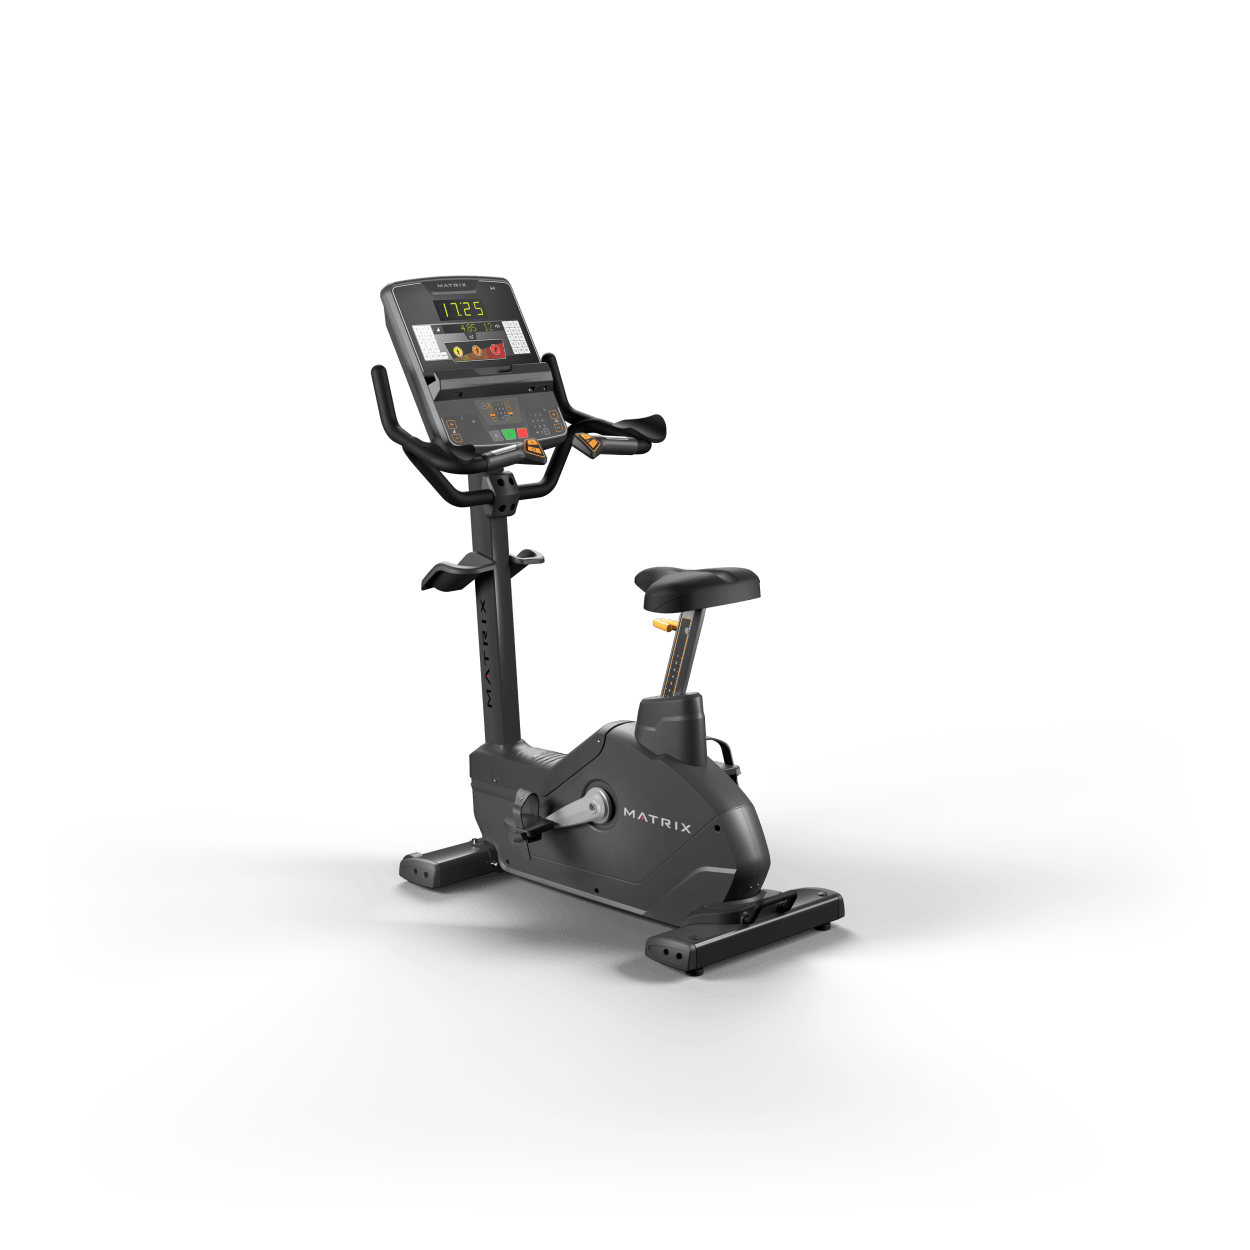 Matrix Fitness Endurance Upright Cycle with Group Training Console full view | Fitness Experience